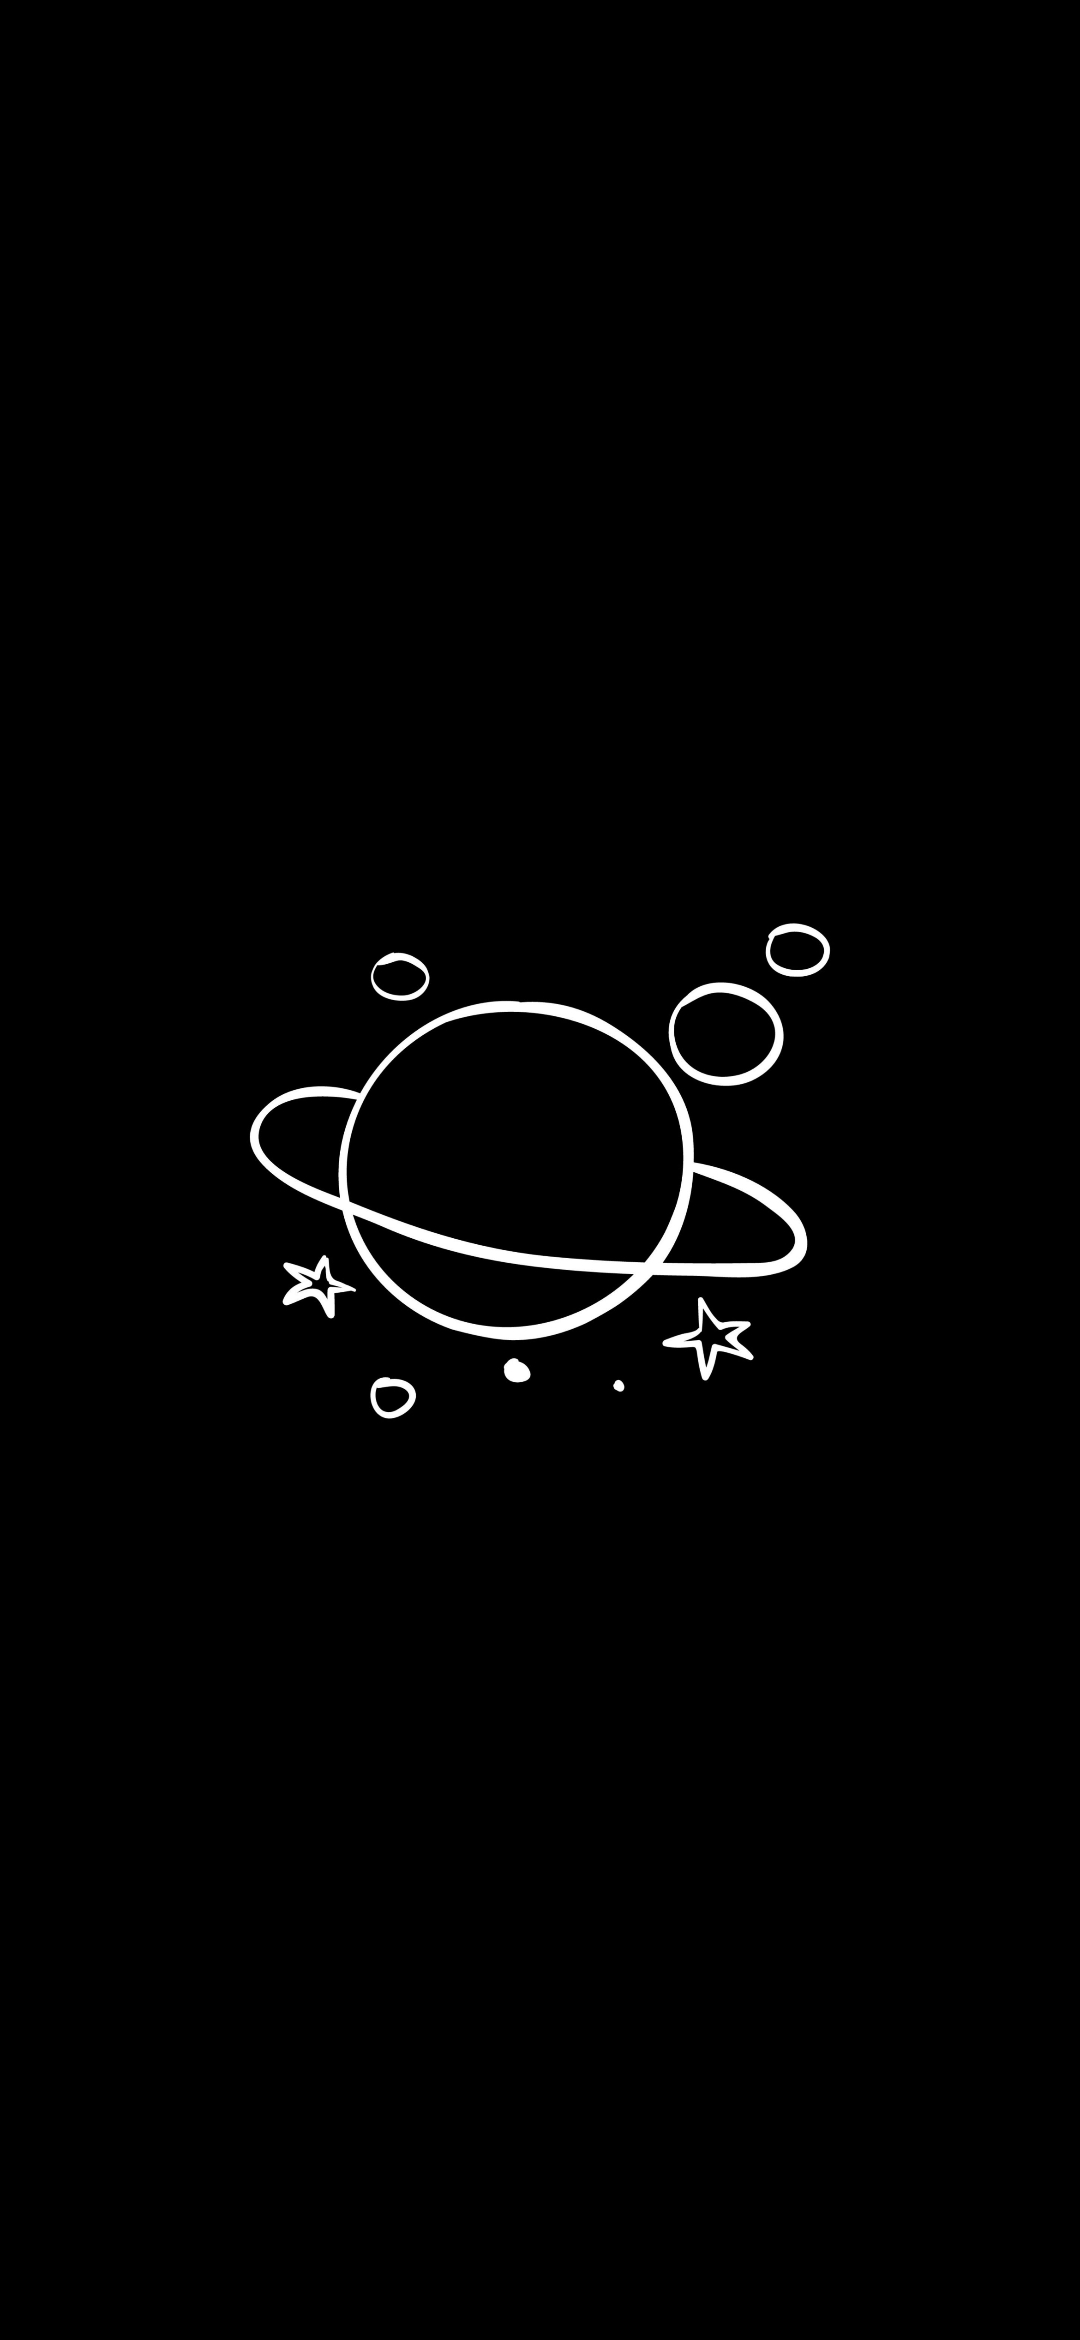 General 1080x2340 black background space planet